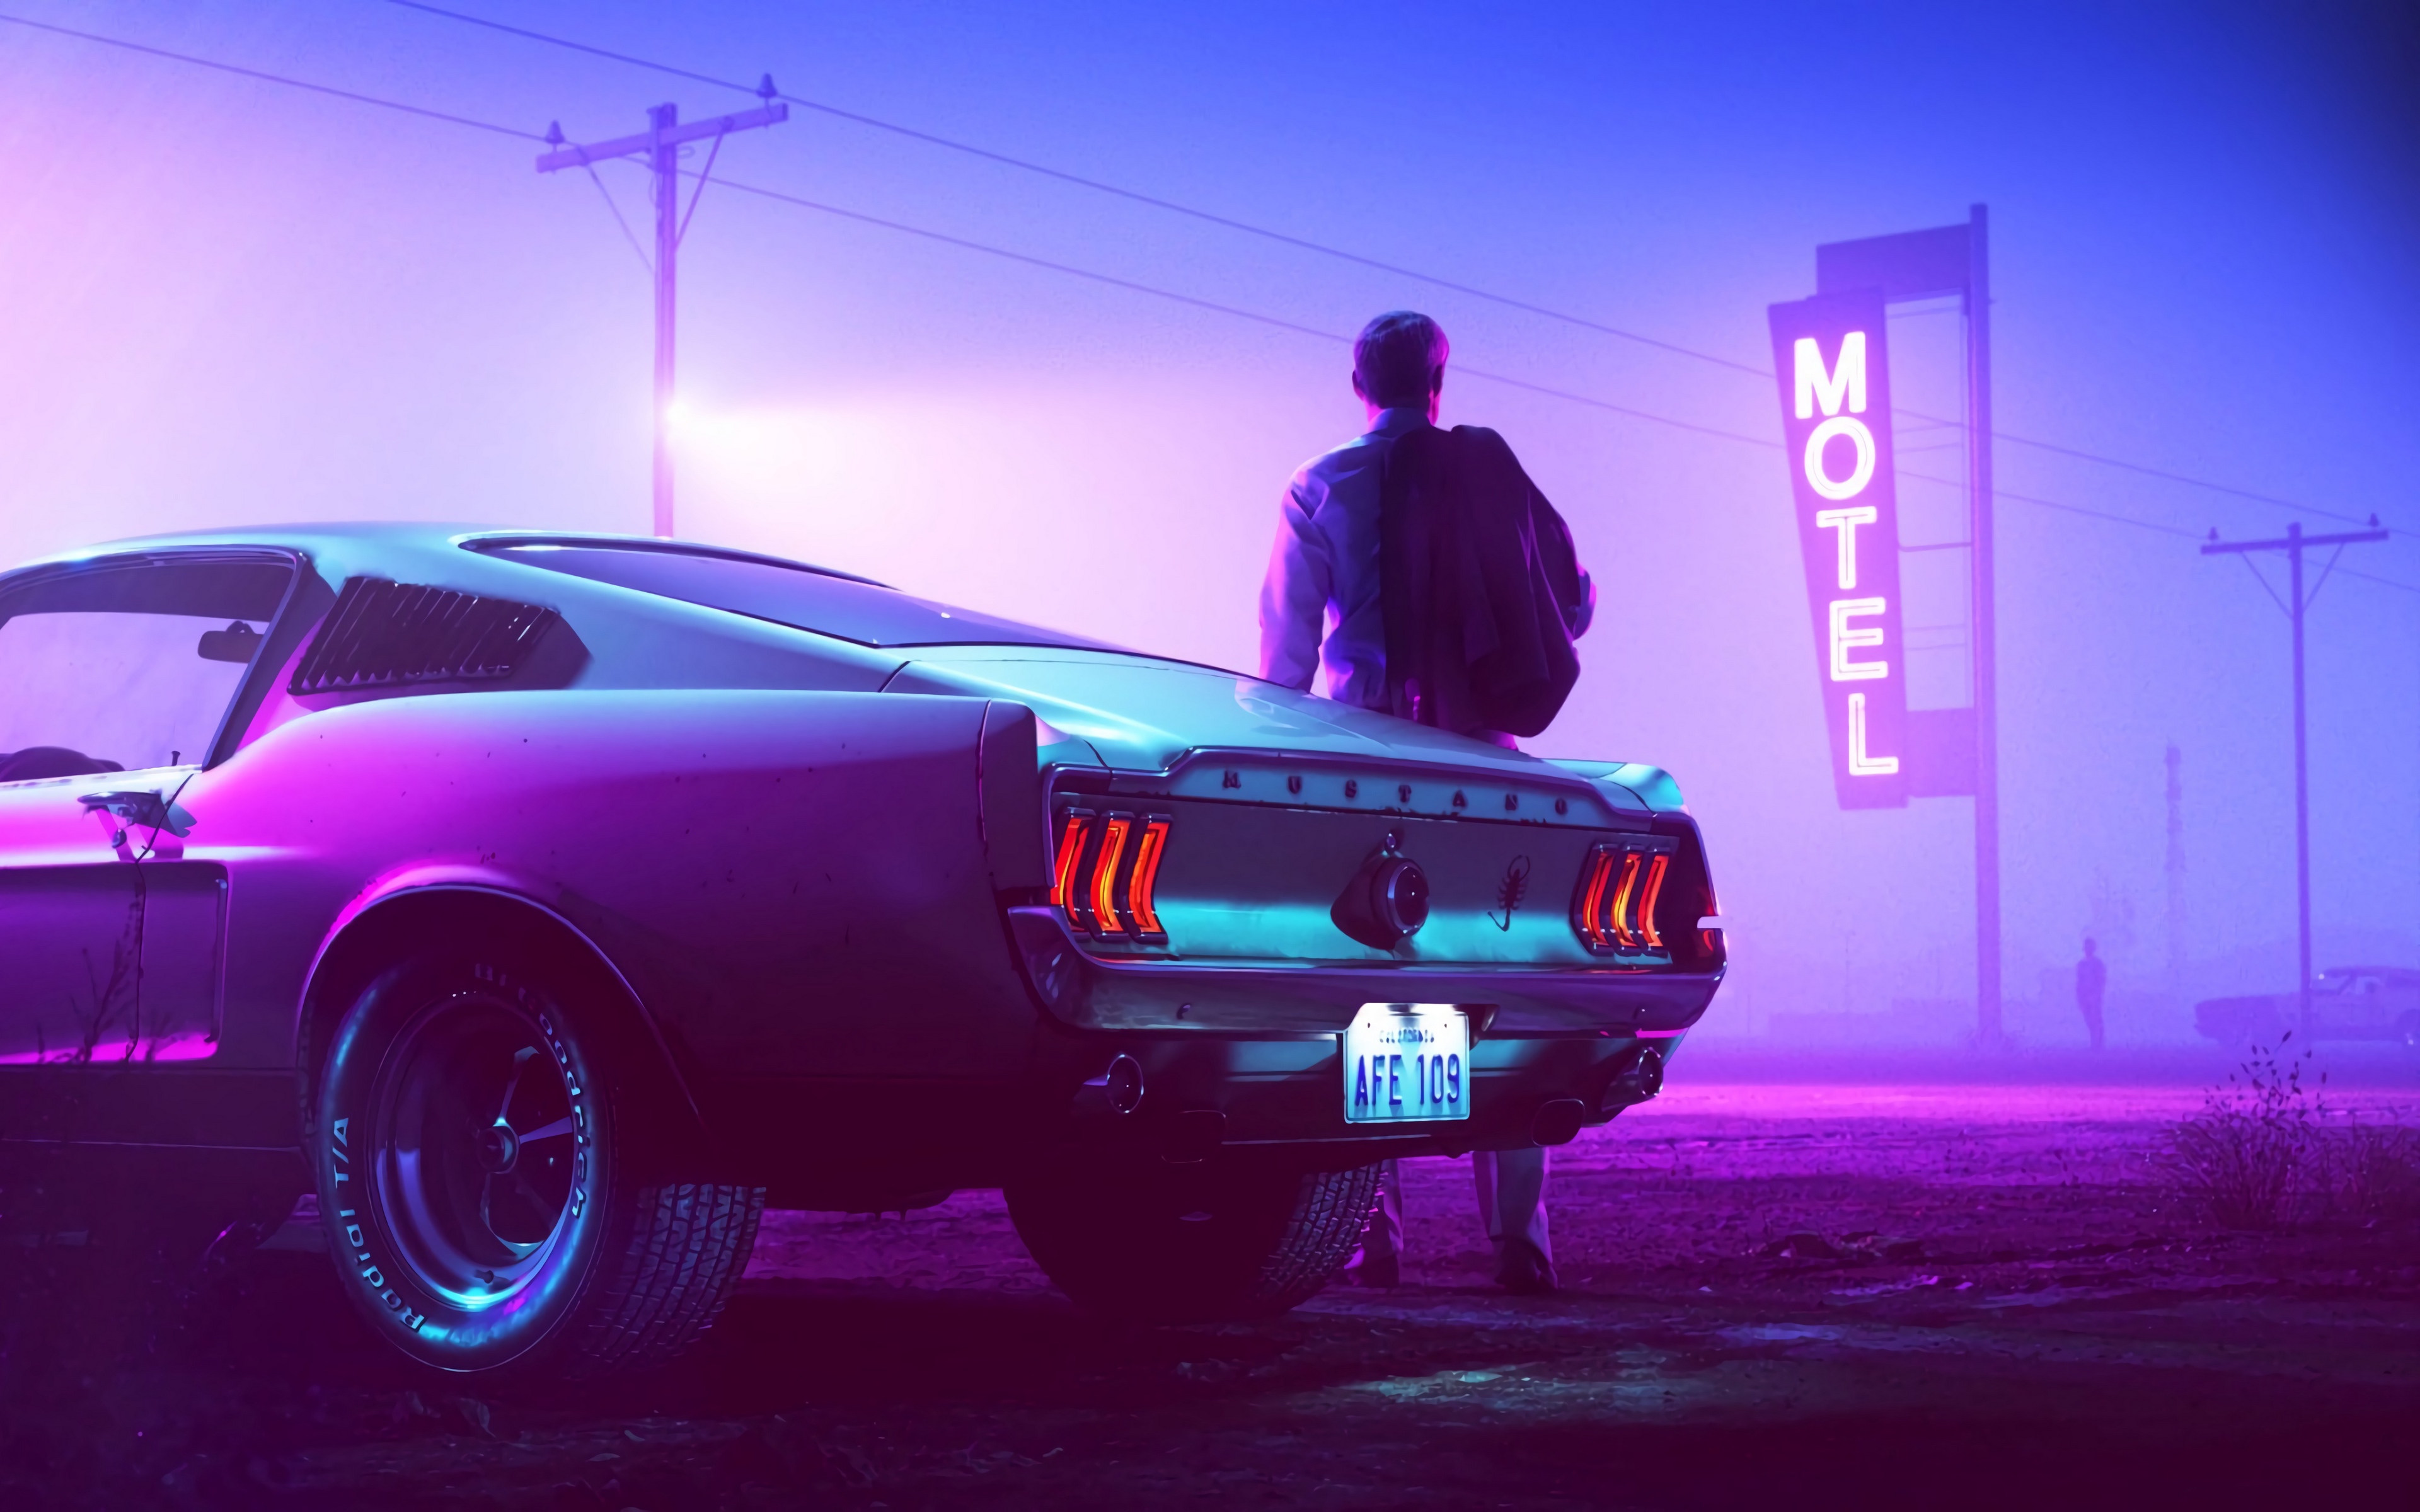 38+ Cool Cars With Neon Lights Wallpaper free download